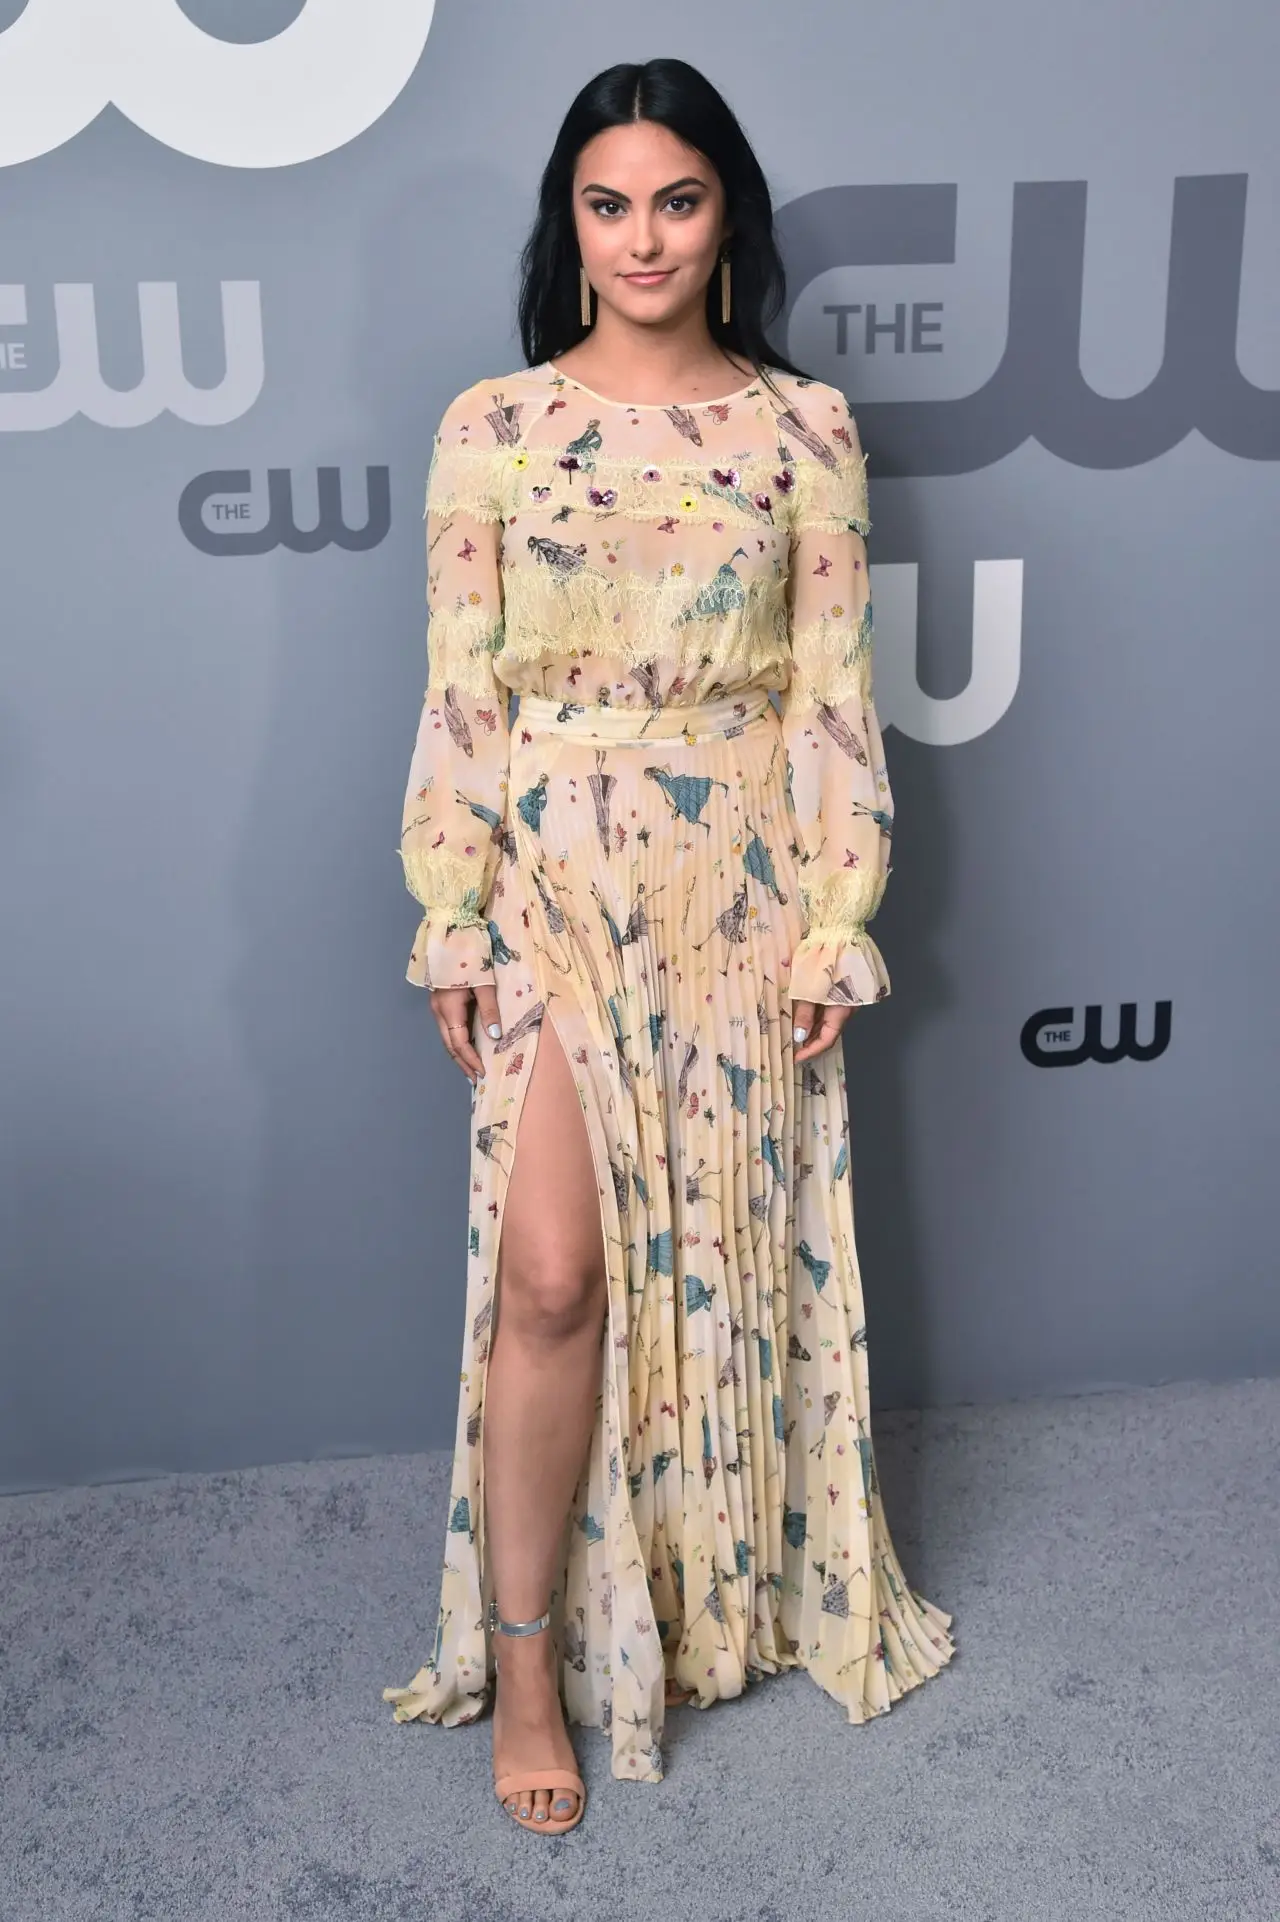 CAMILA MENDES AT CW NETWORK UPFRONT PRESENTATION IN NEW YORK CITY4